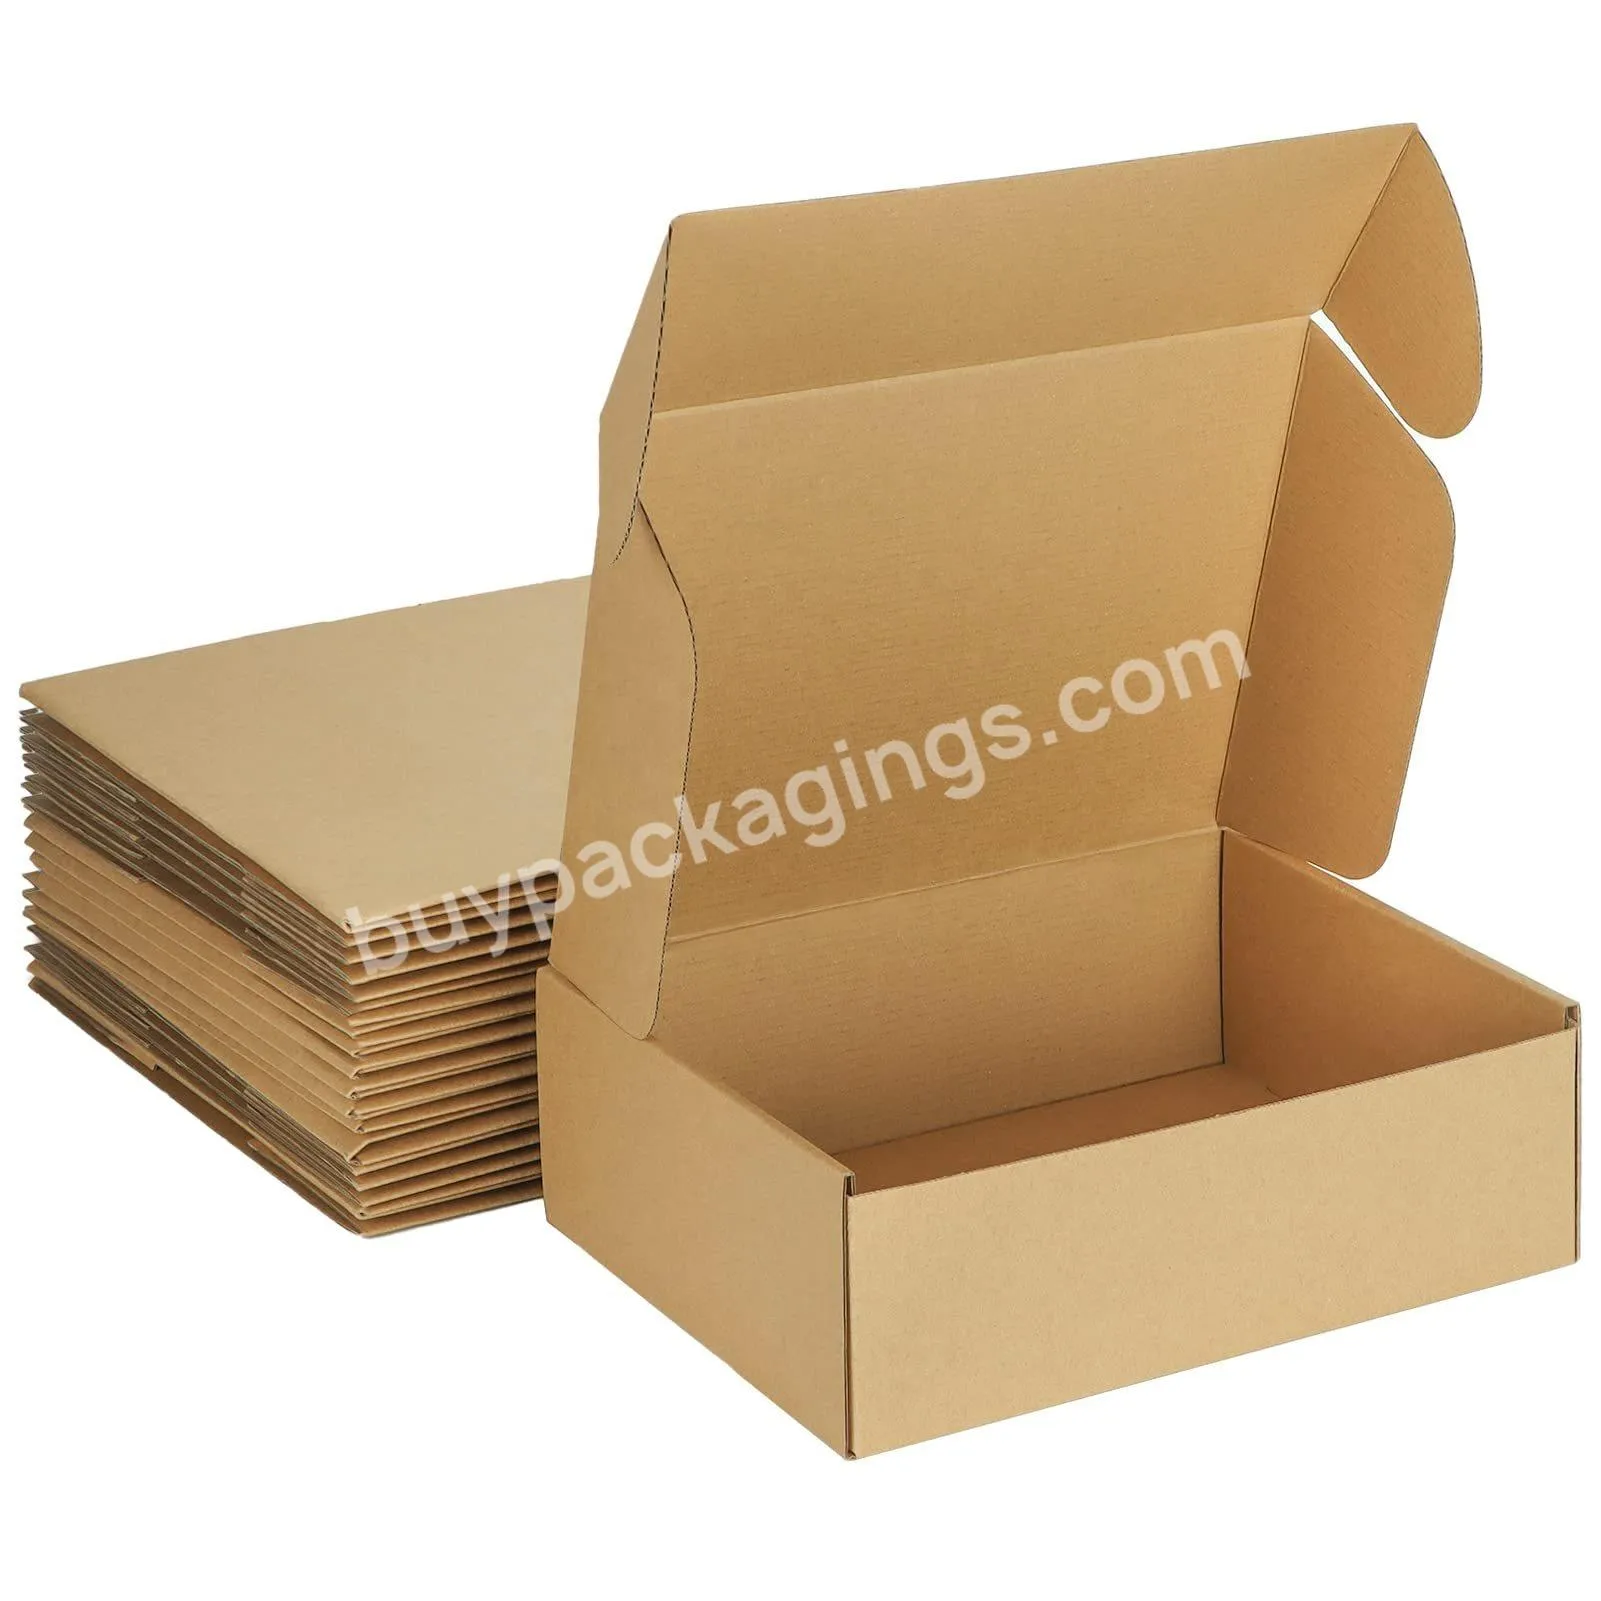 12x9x4inch single wall corrugated cardboard mailer box for clothing, cosmetics and other online shopping